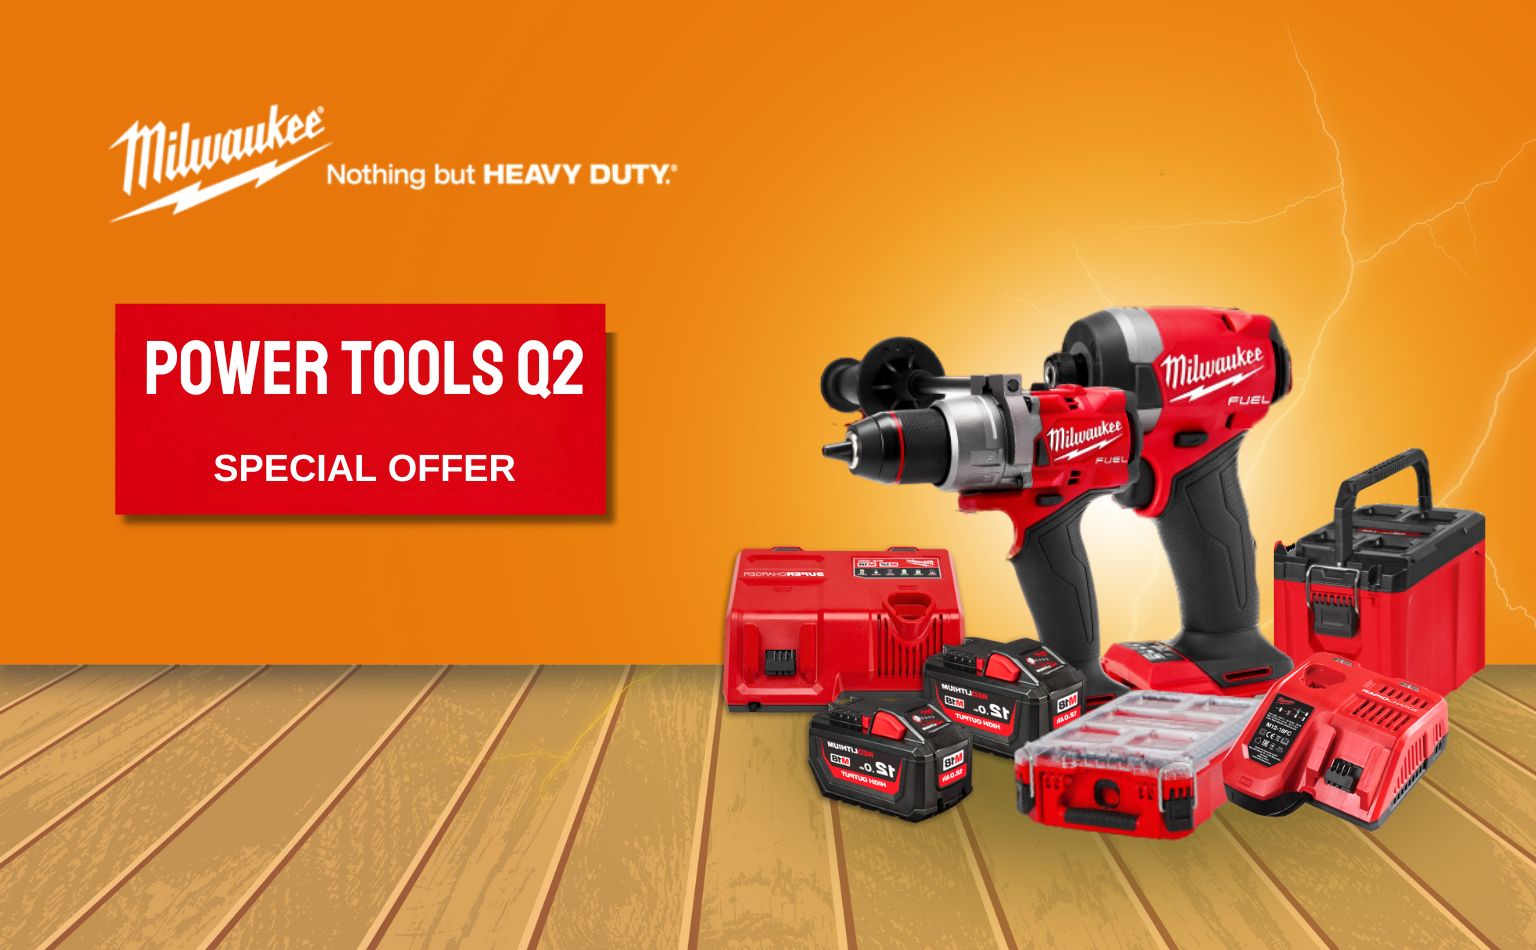 Milwaukee Power Tools Q2 Special Offer